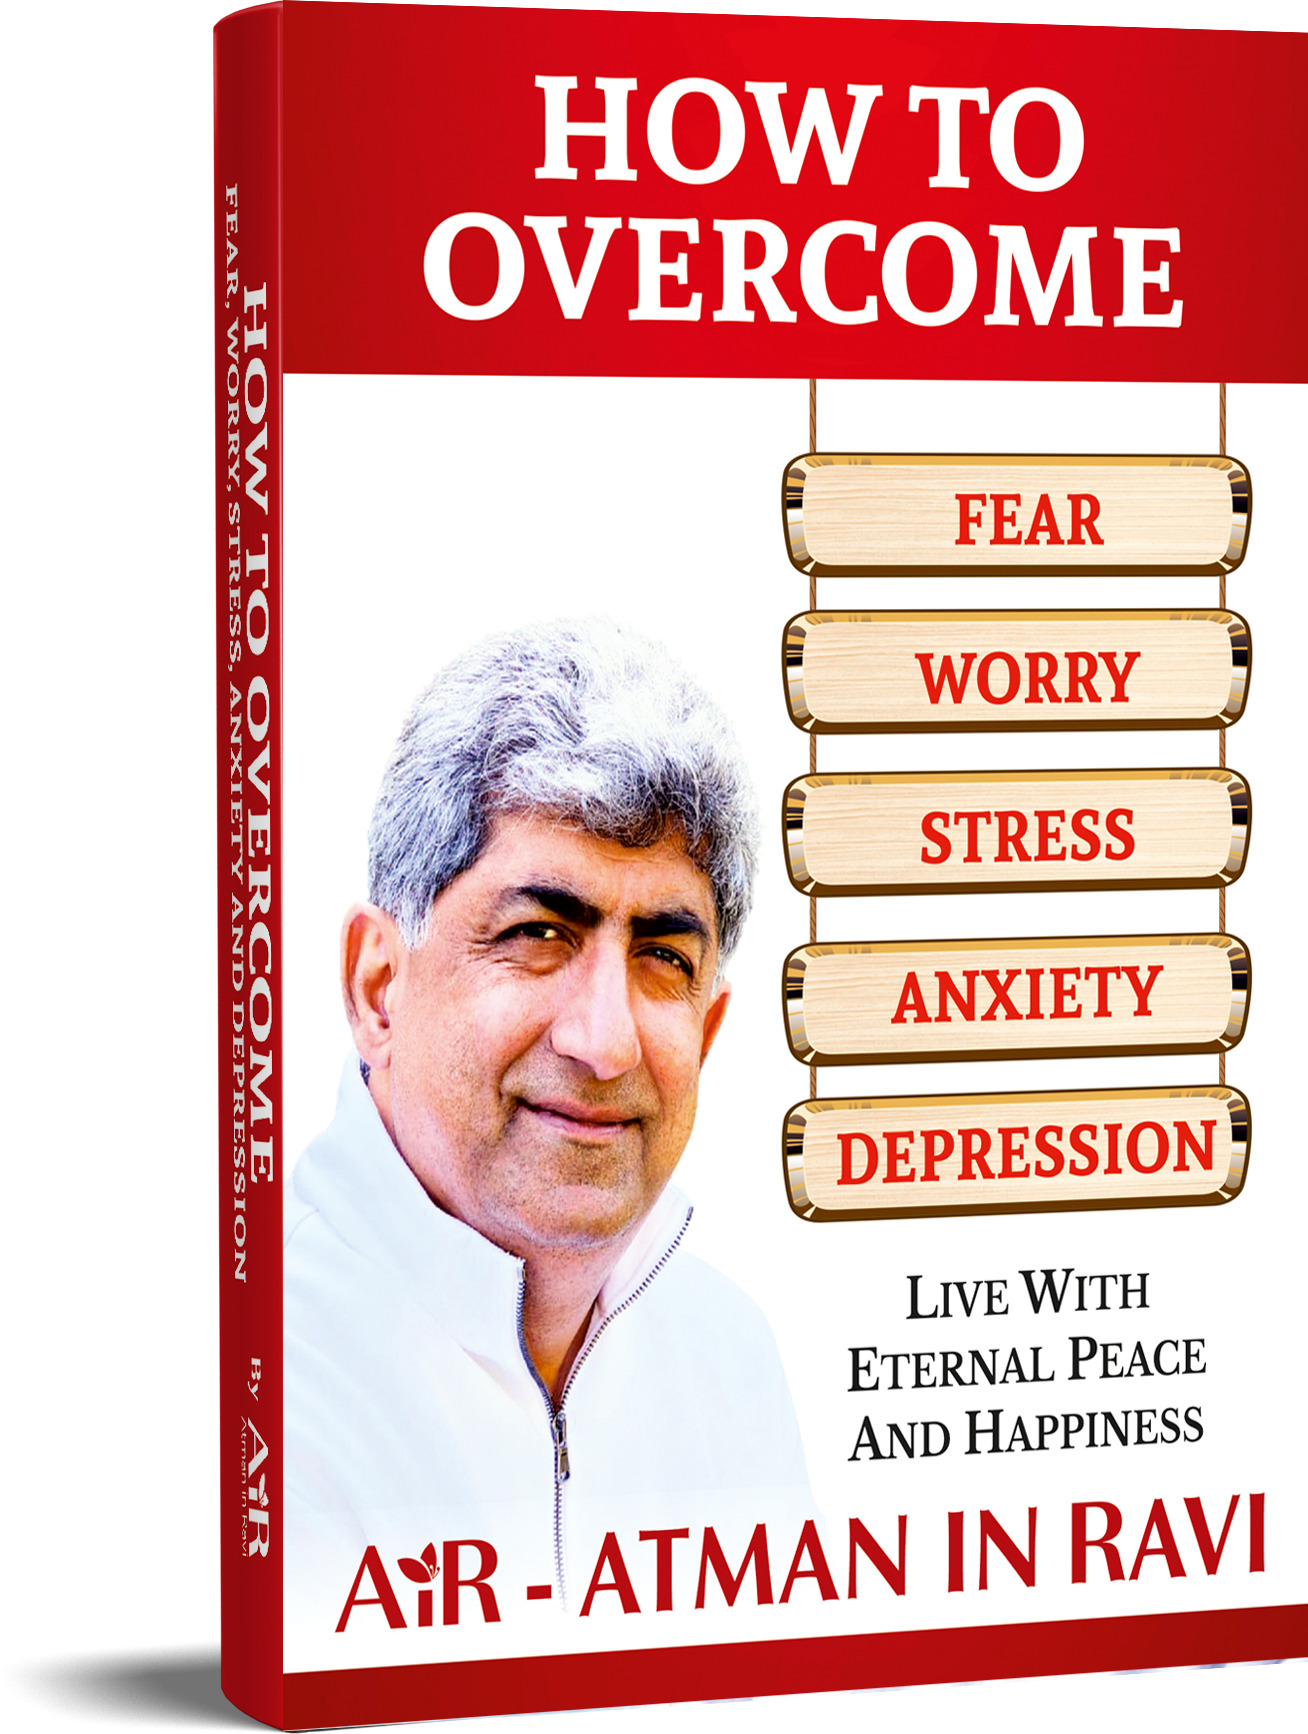 How To Overcome Fear, Worry, Stress, Anxiety And Depression